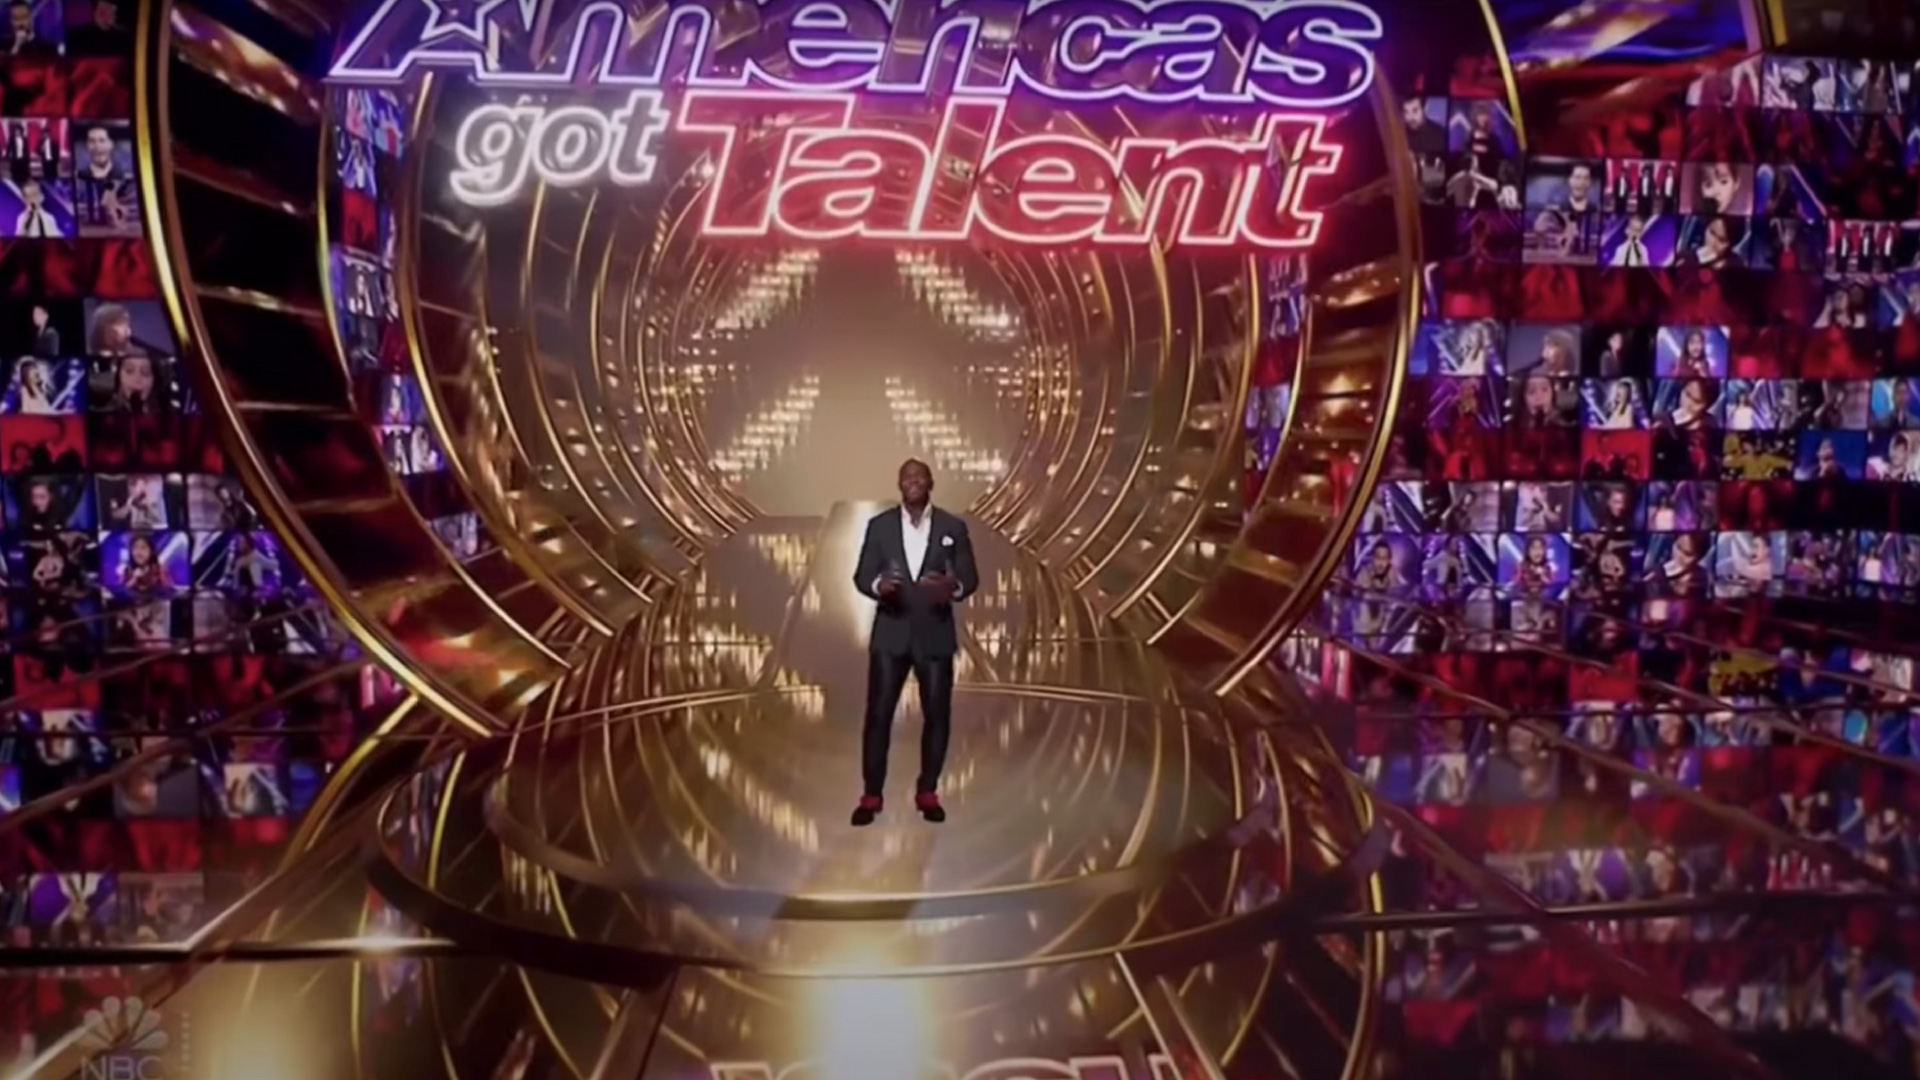 PRG supports America's Got Talent at our xR Studio in Los Angeles